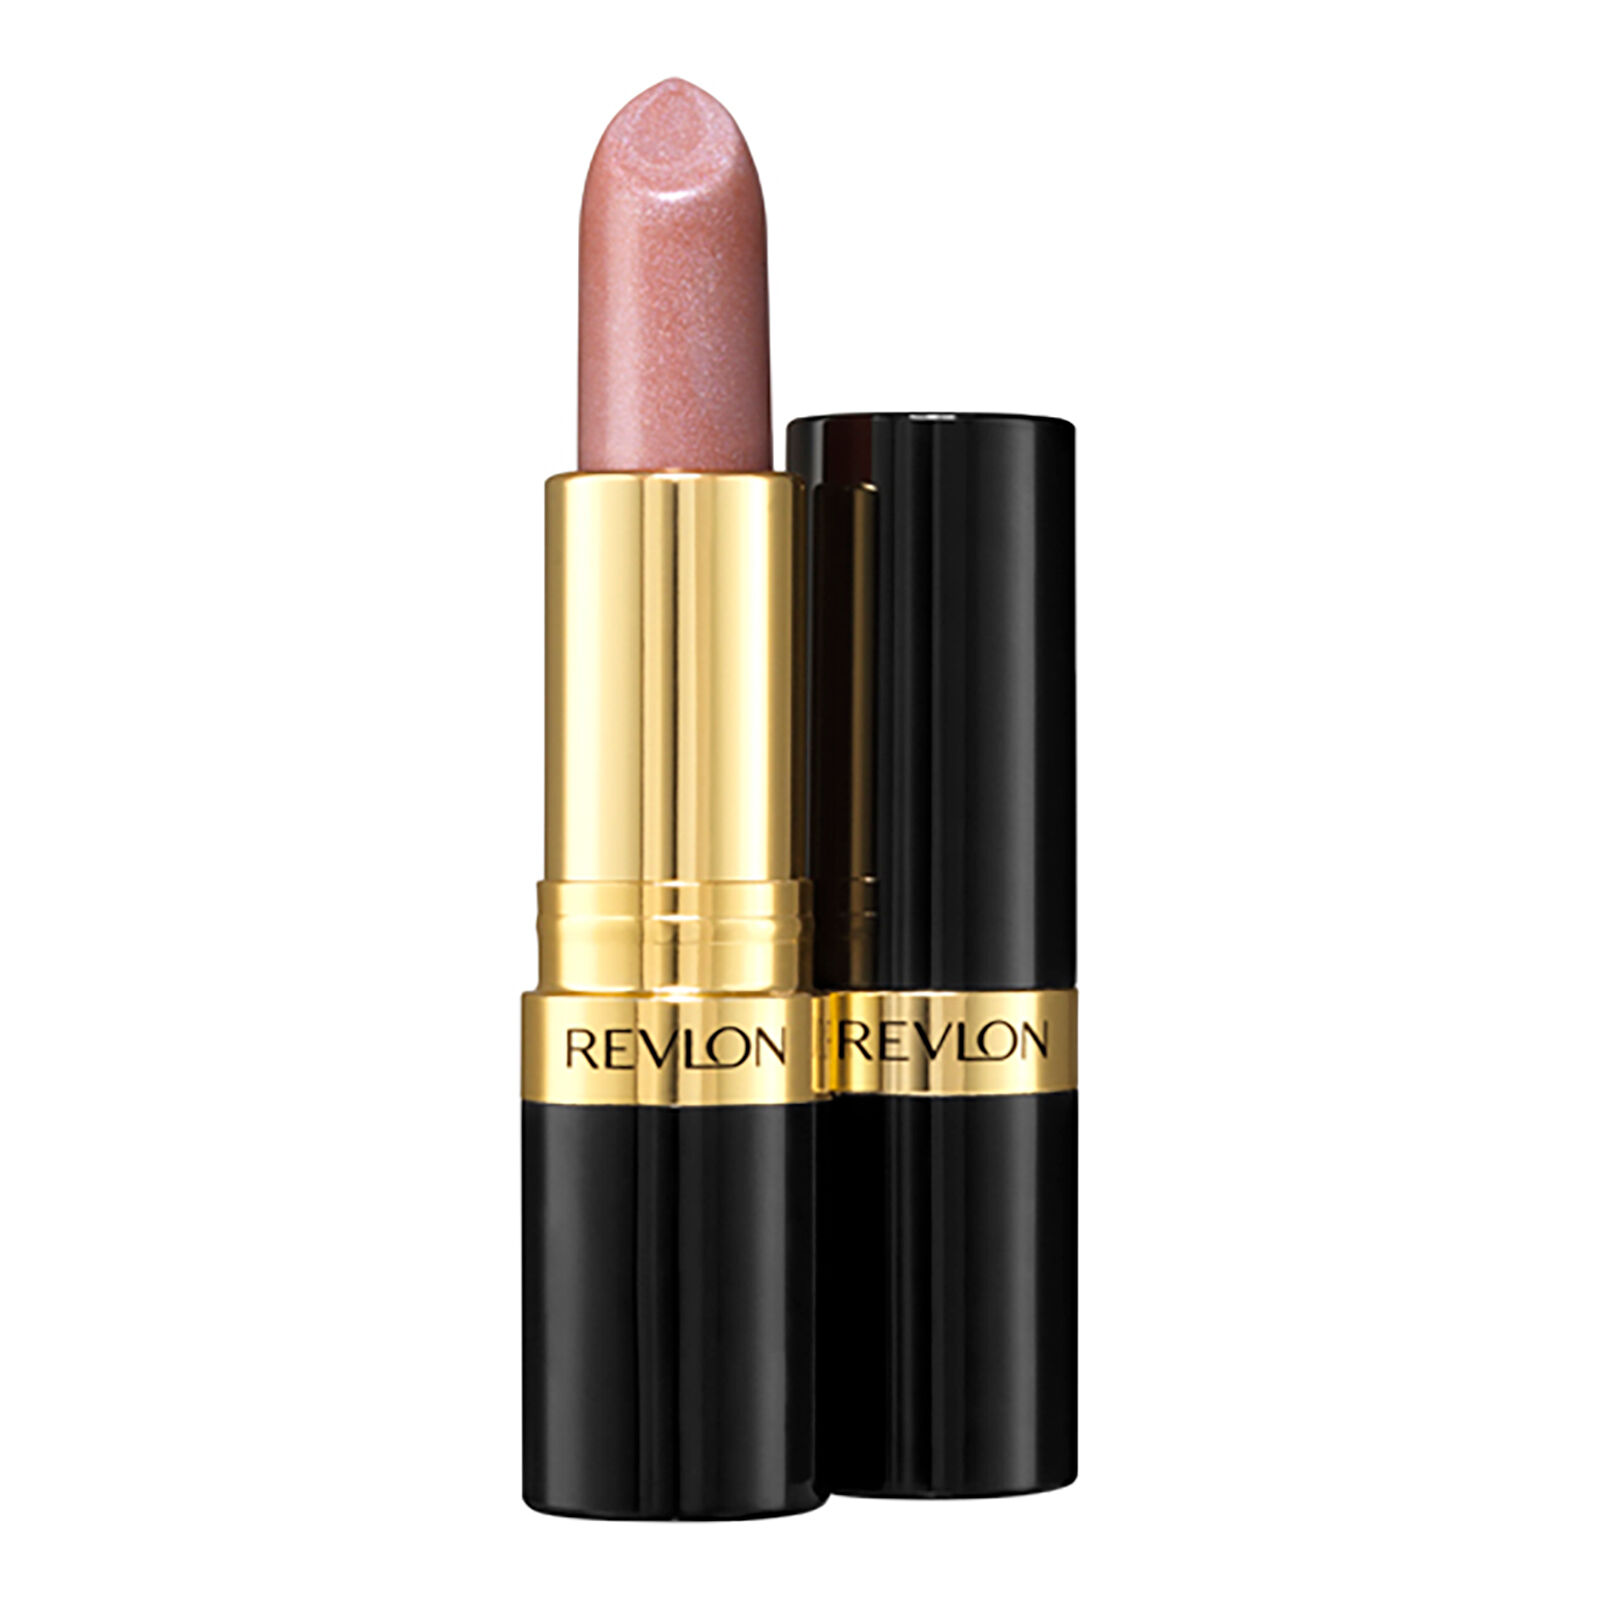 Revlon Super Lustrous Lipstick (ulike nyanser) - Pink in the Afternoon